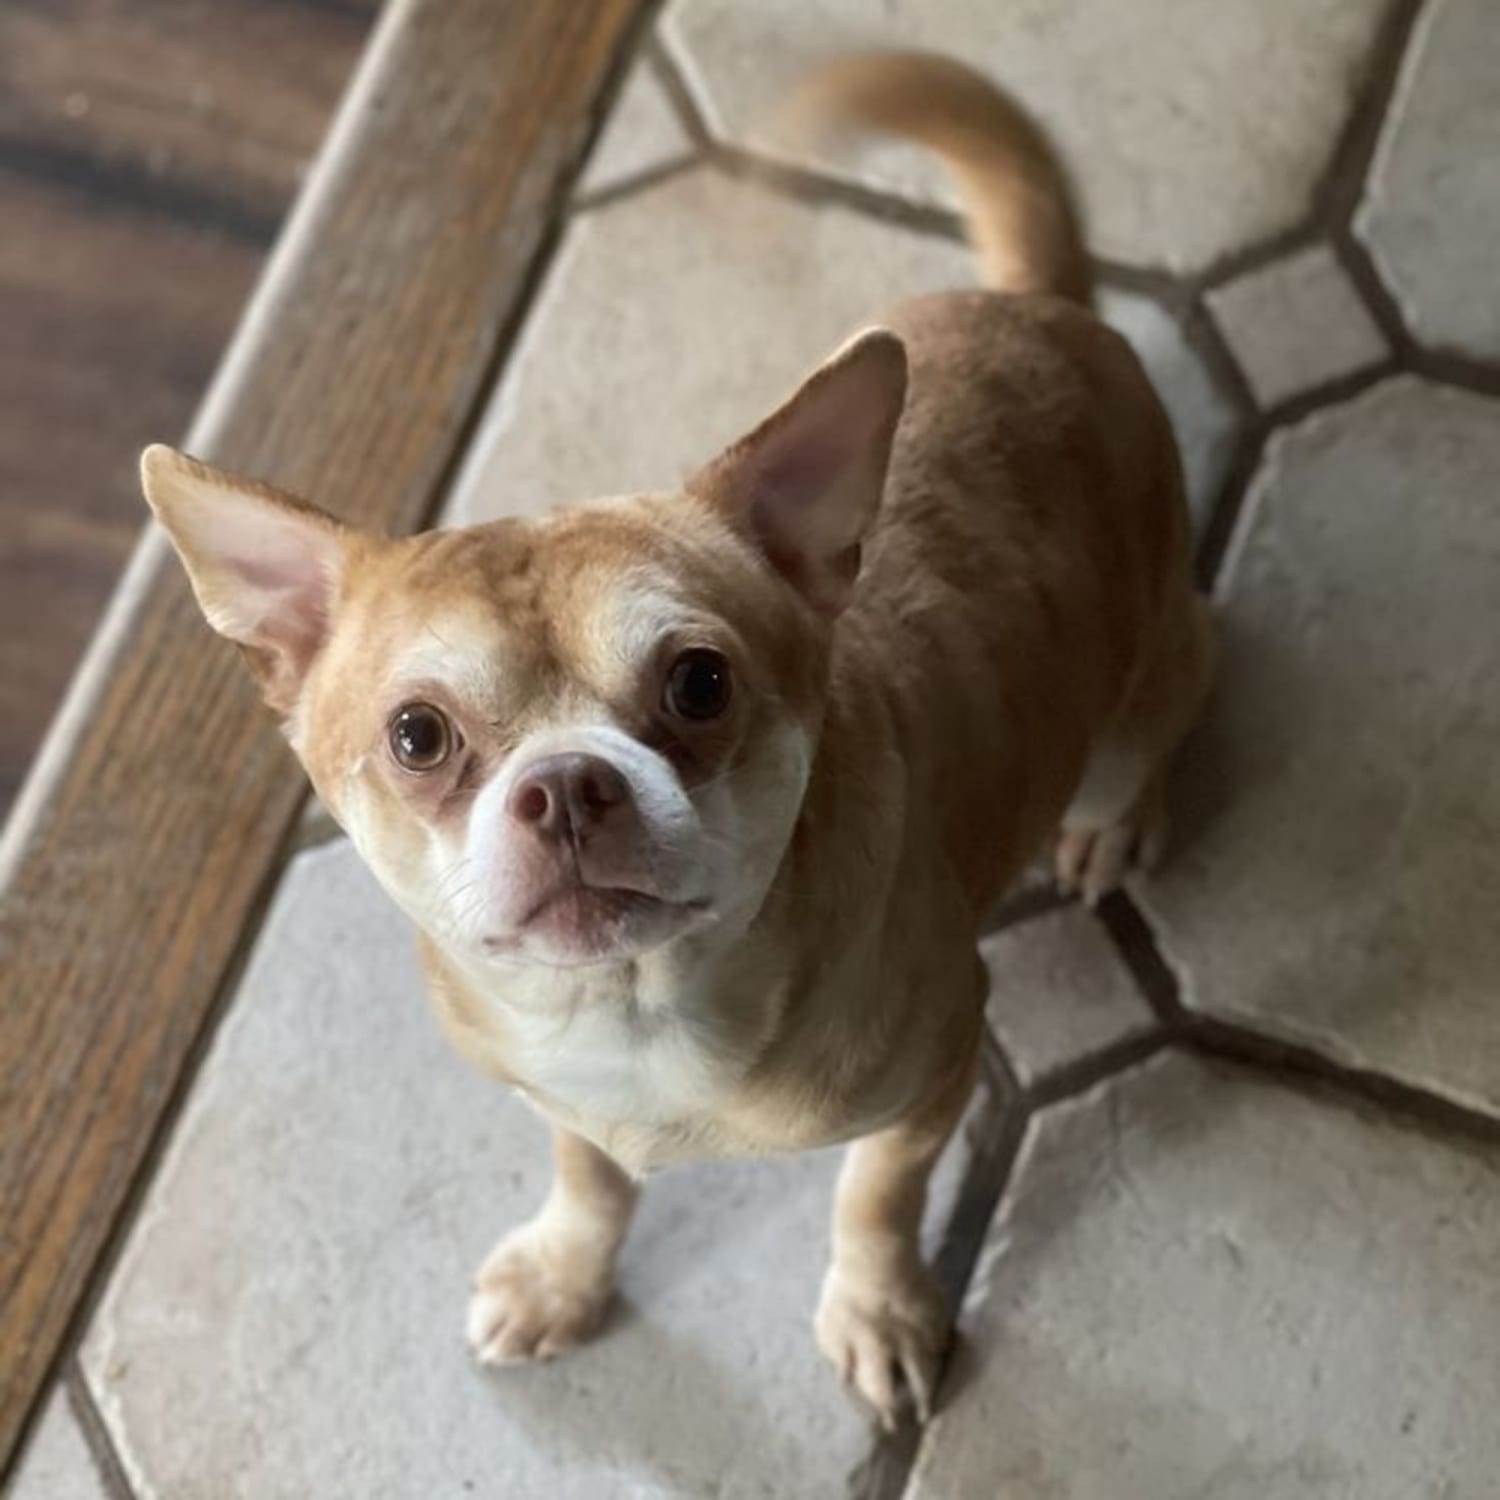 Brutally Honest Adoption Ad For Demonic Chihuahua Goes Viral